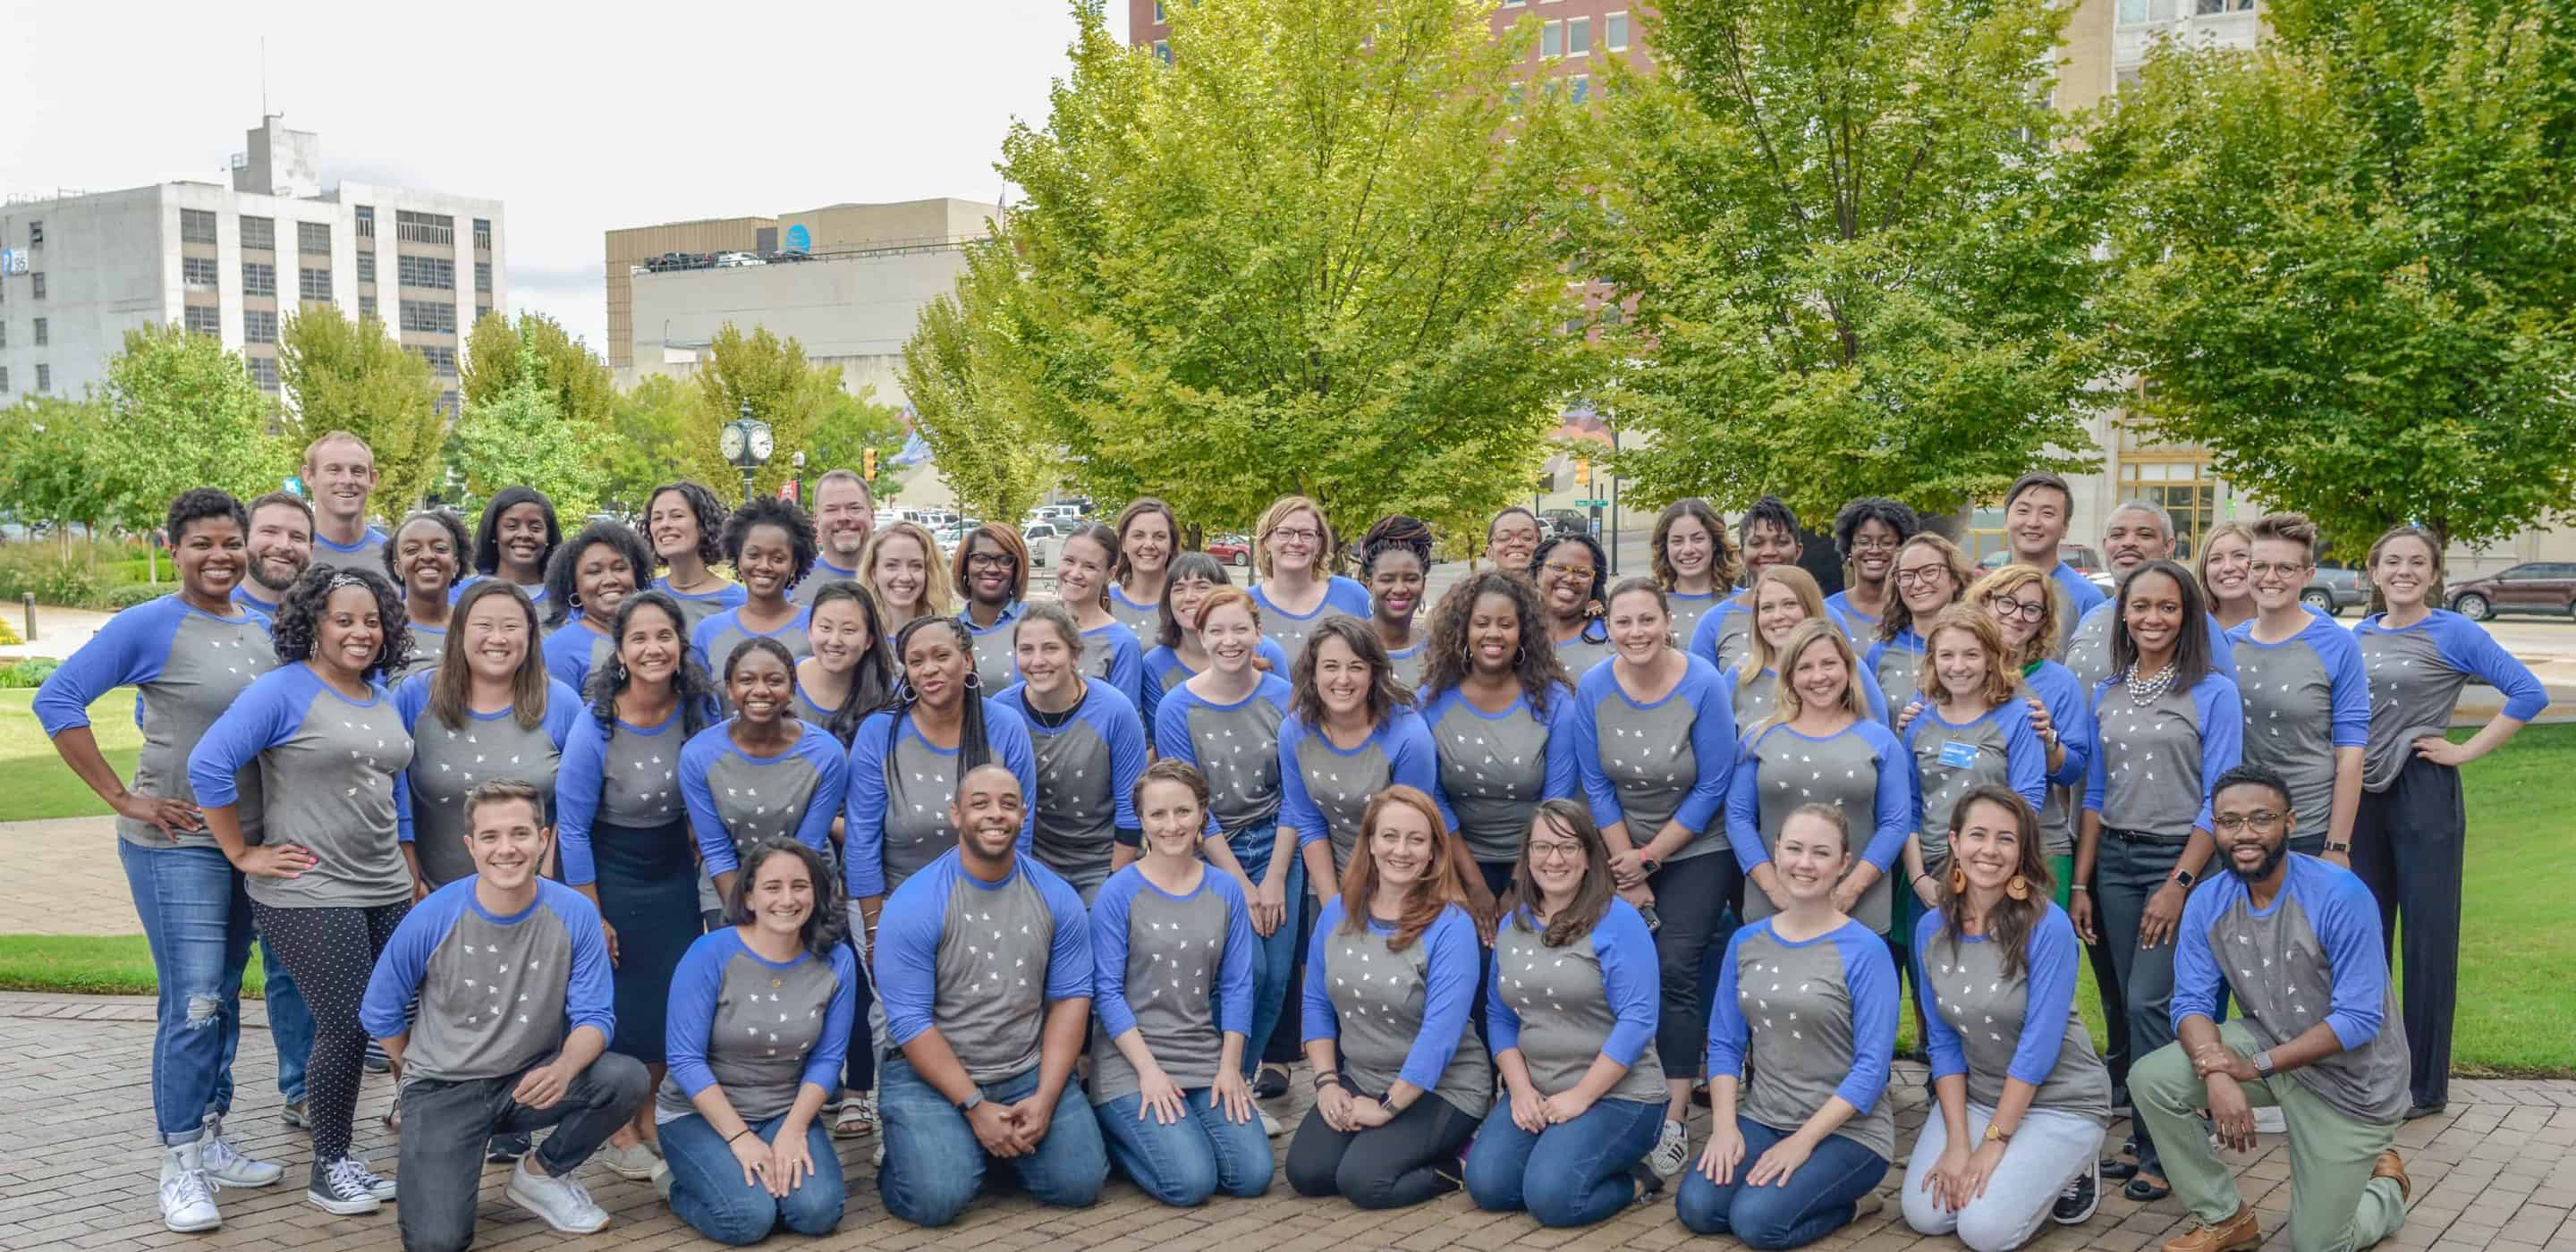 A group photo of the Leading Educators team wearing matching shirts outdoors.